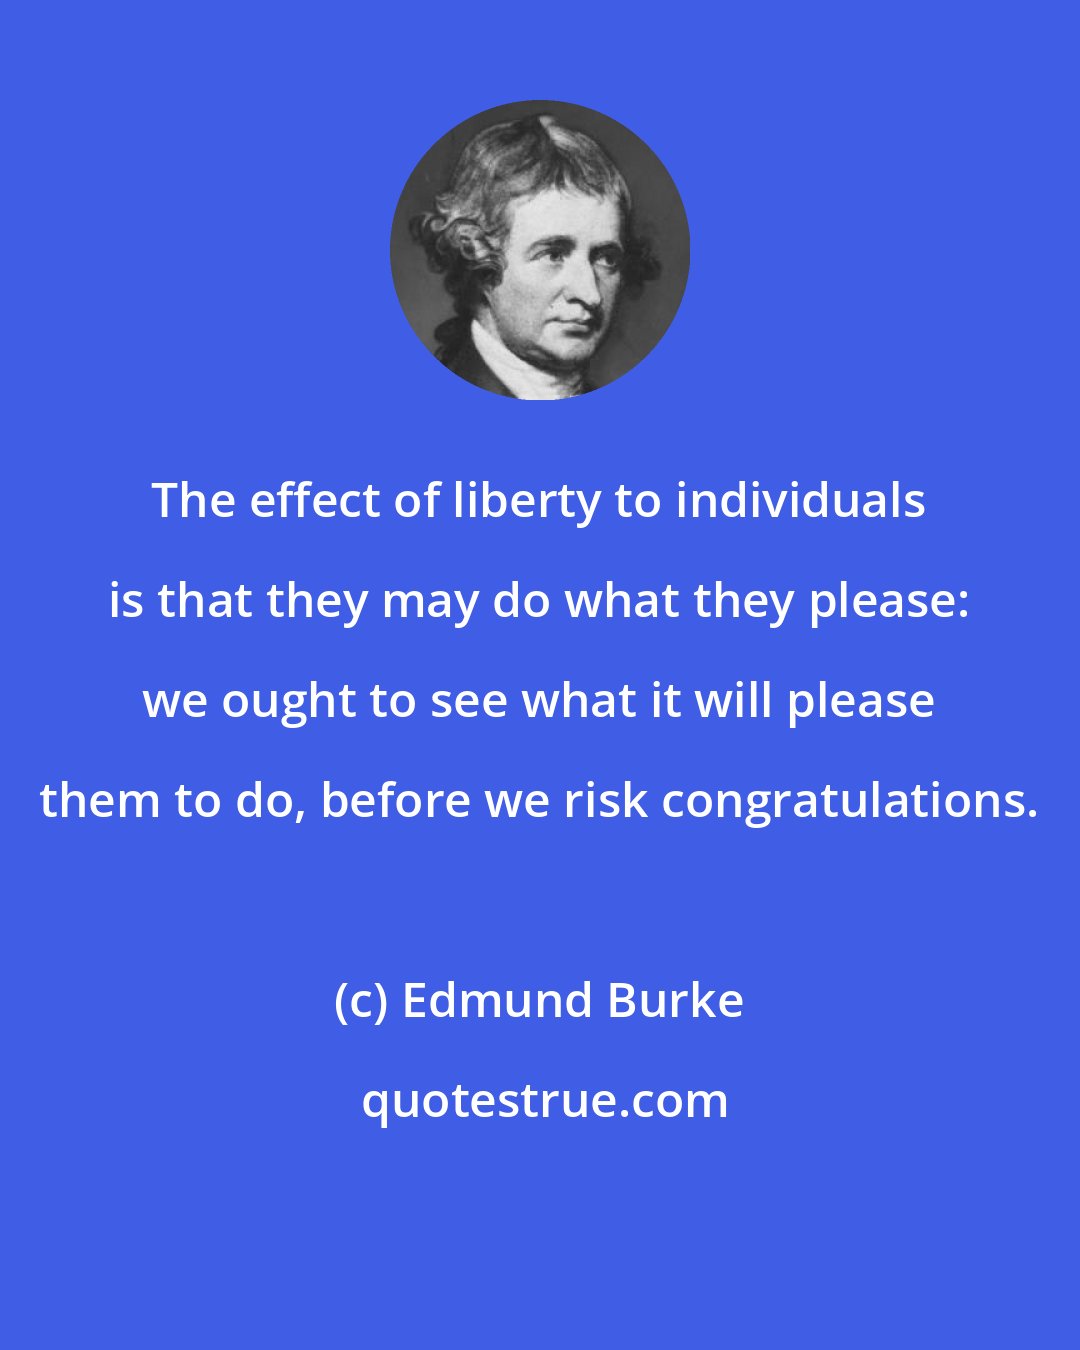 Edmund Burke: The effect of liberty to individuals is that they may do what they please: we ought to see what it will please them to do, before we risk congratulations.